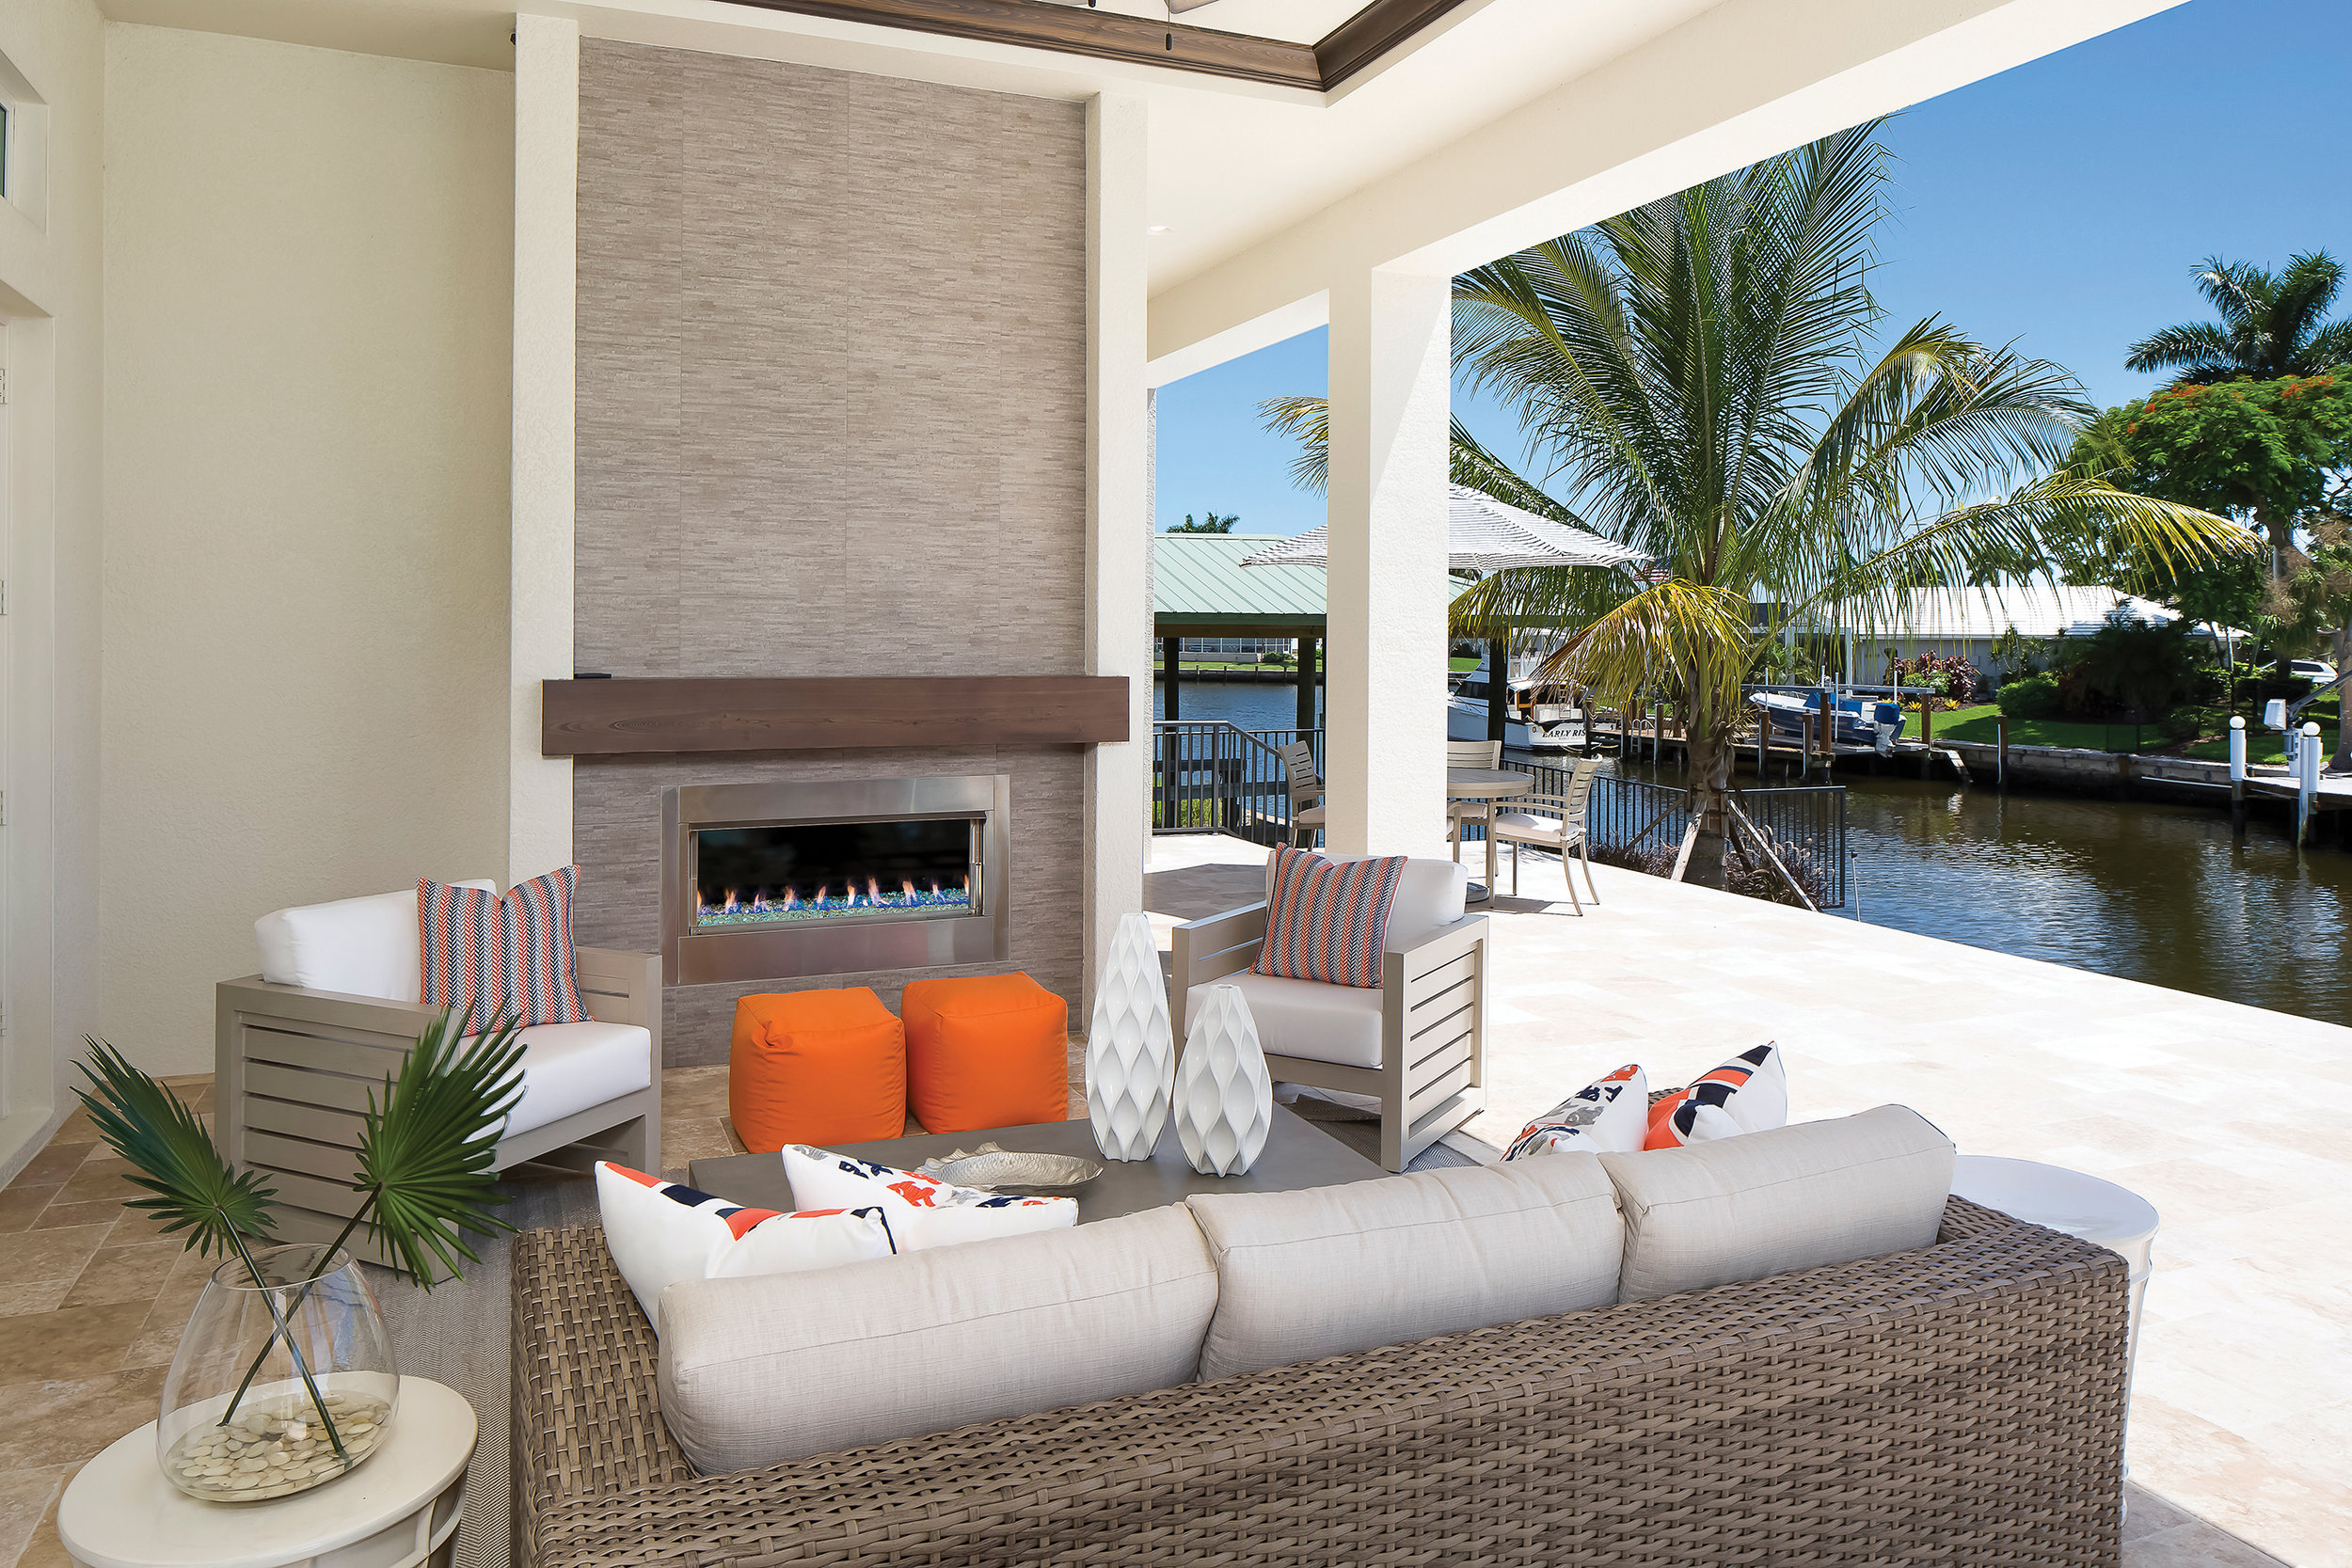  The lanai offers multiple seating and entertaining areas. The main living space is a fun mix of vibrant orange and resort-style seating options. The fireplace with vibrant blue glass and the feature wall create the perfect outdoor focal point. Beyon